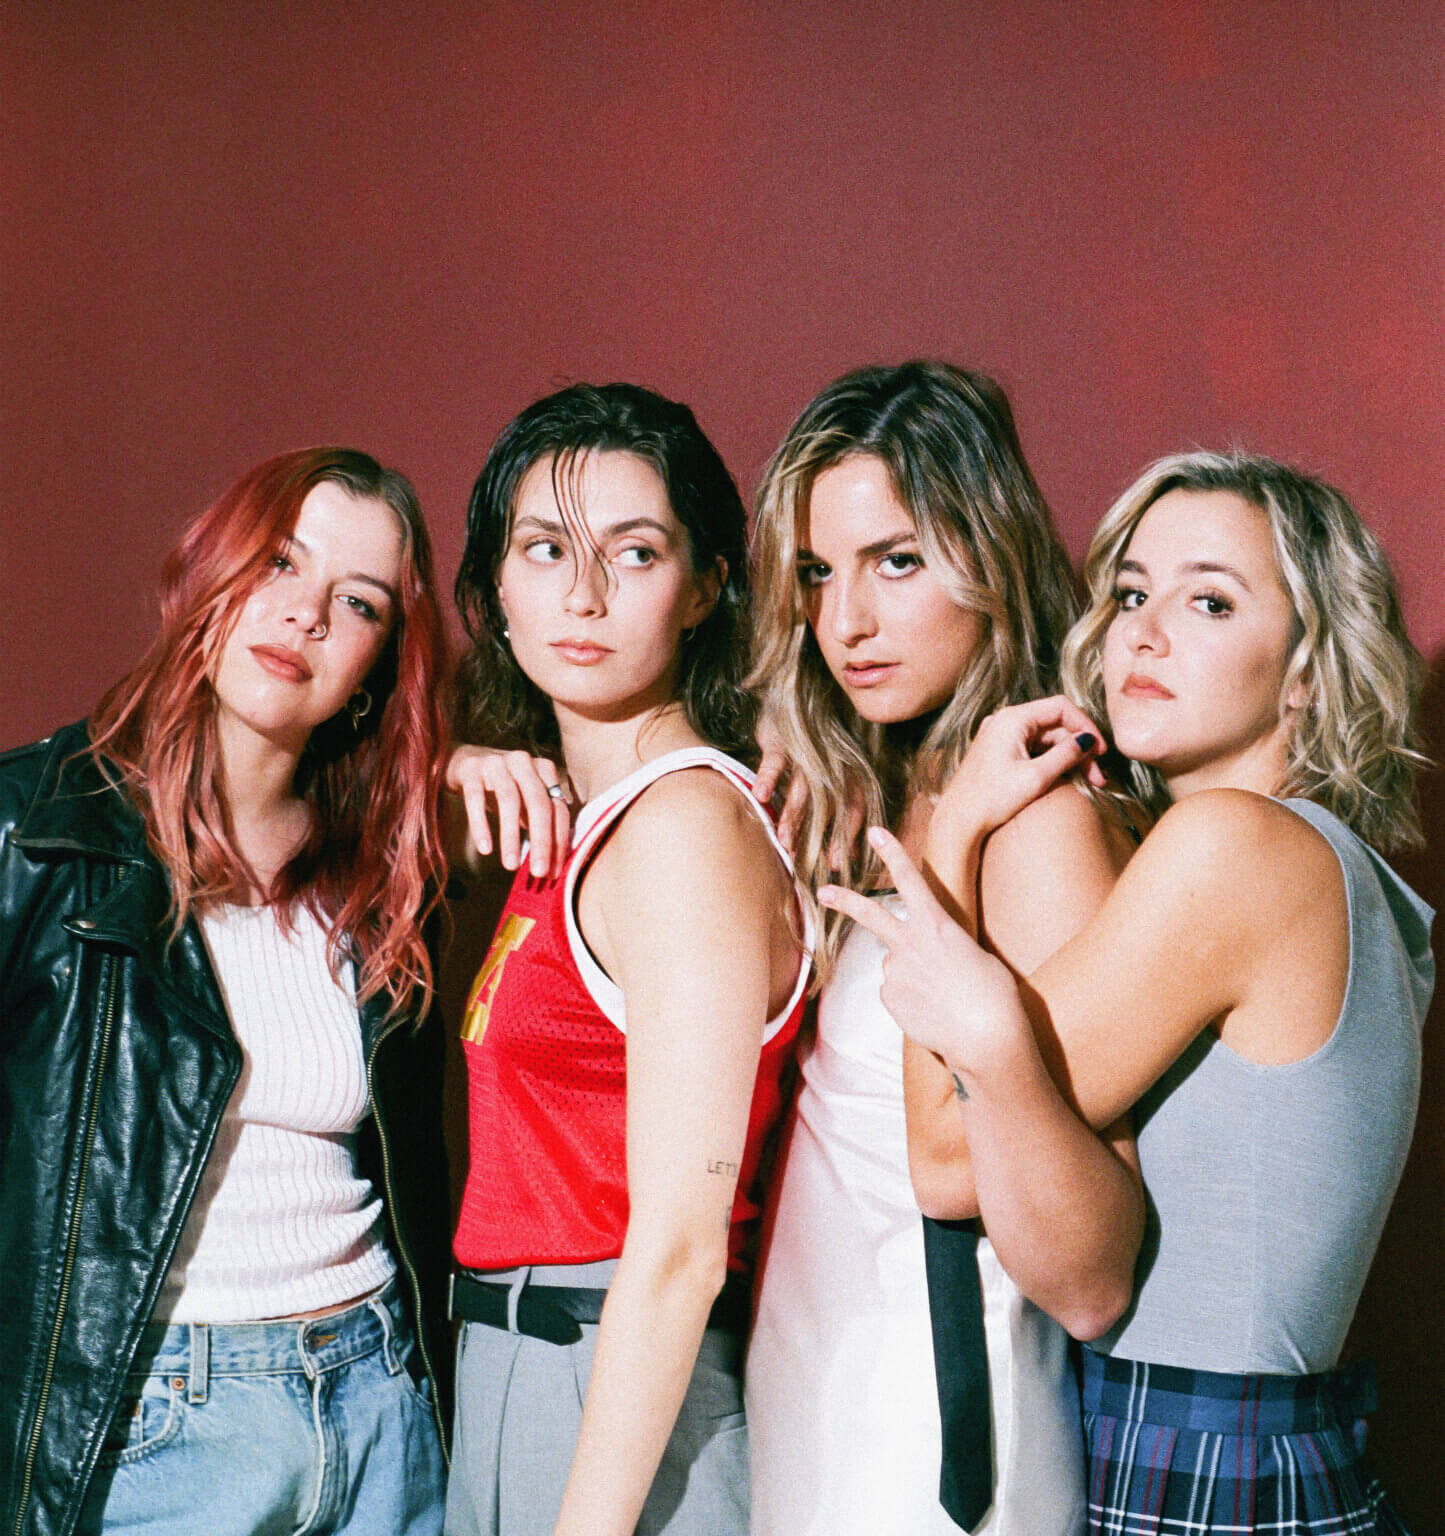 Toronto's finest, The Beaches share their latest single “Me & Me.” The track arrives ahead of their forthcoming album Blame My Ex